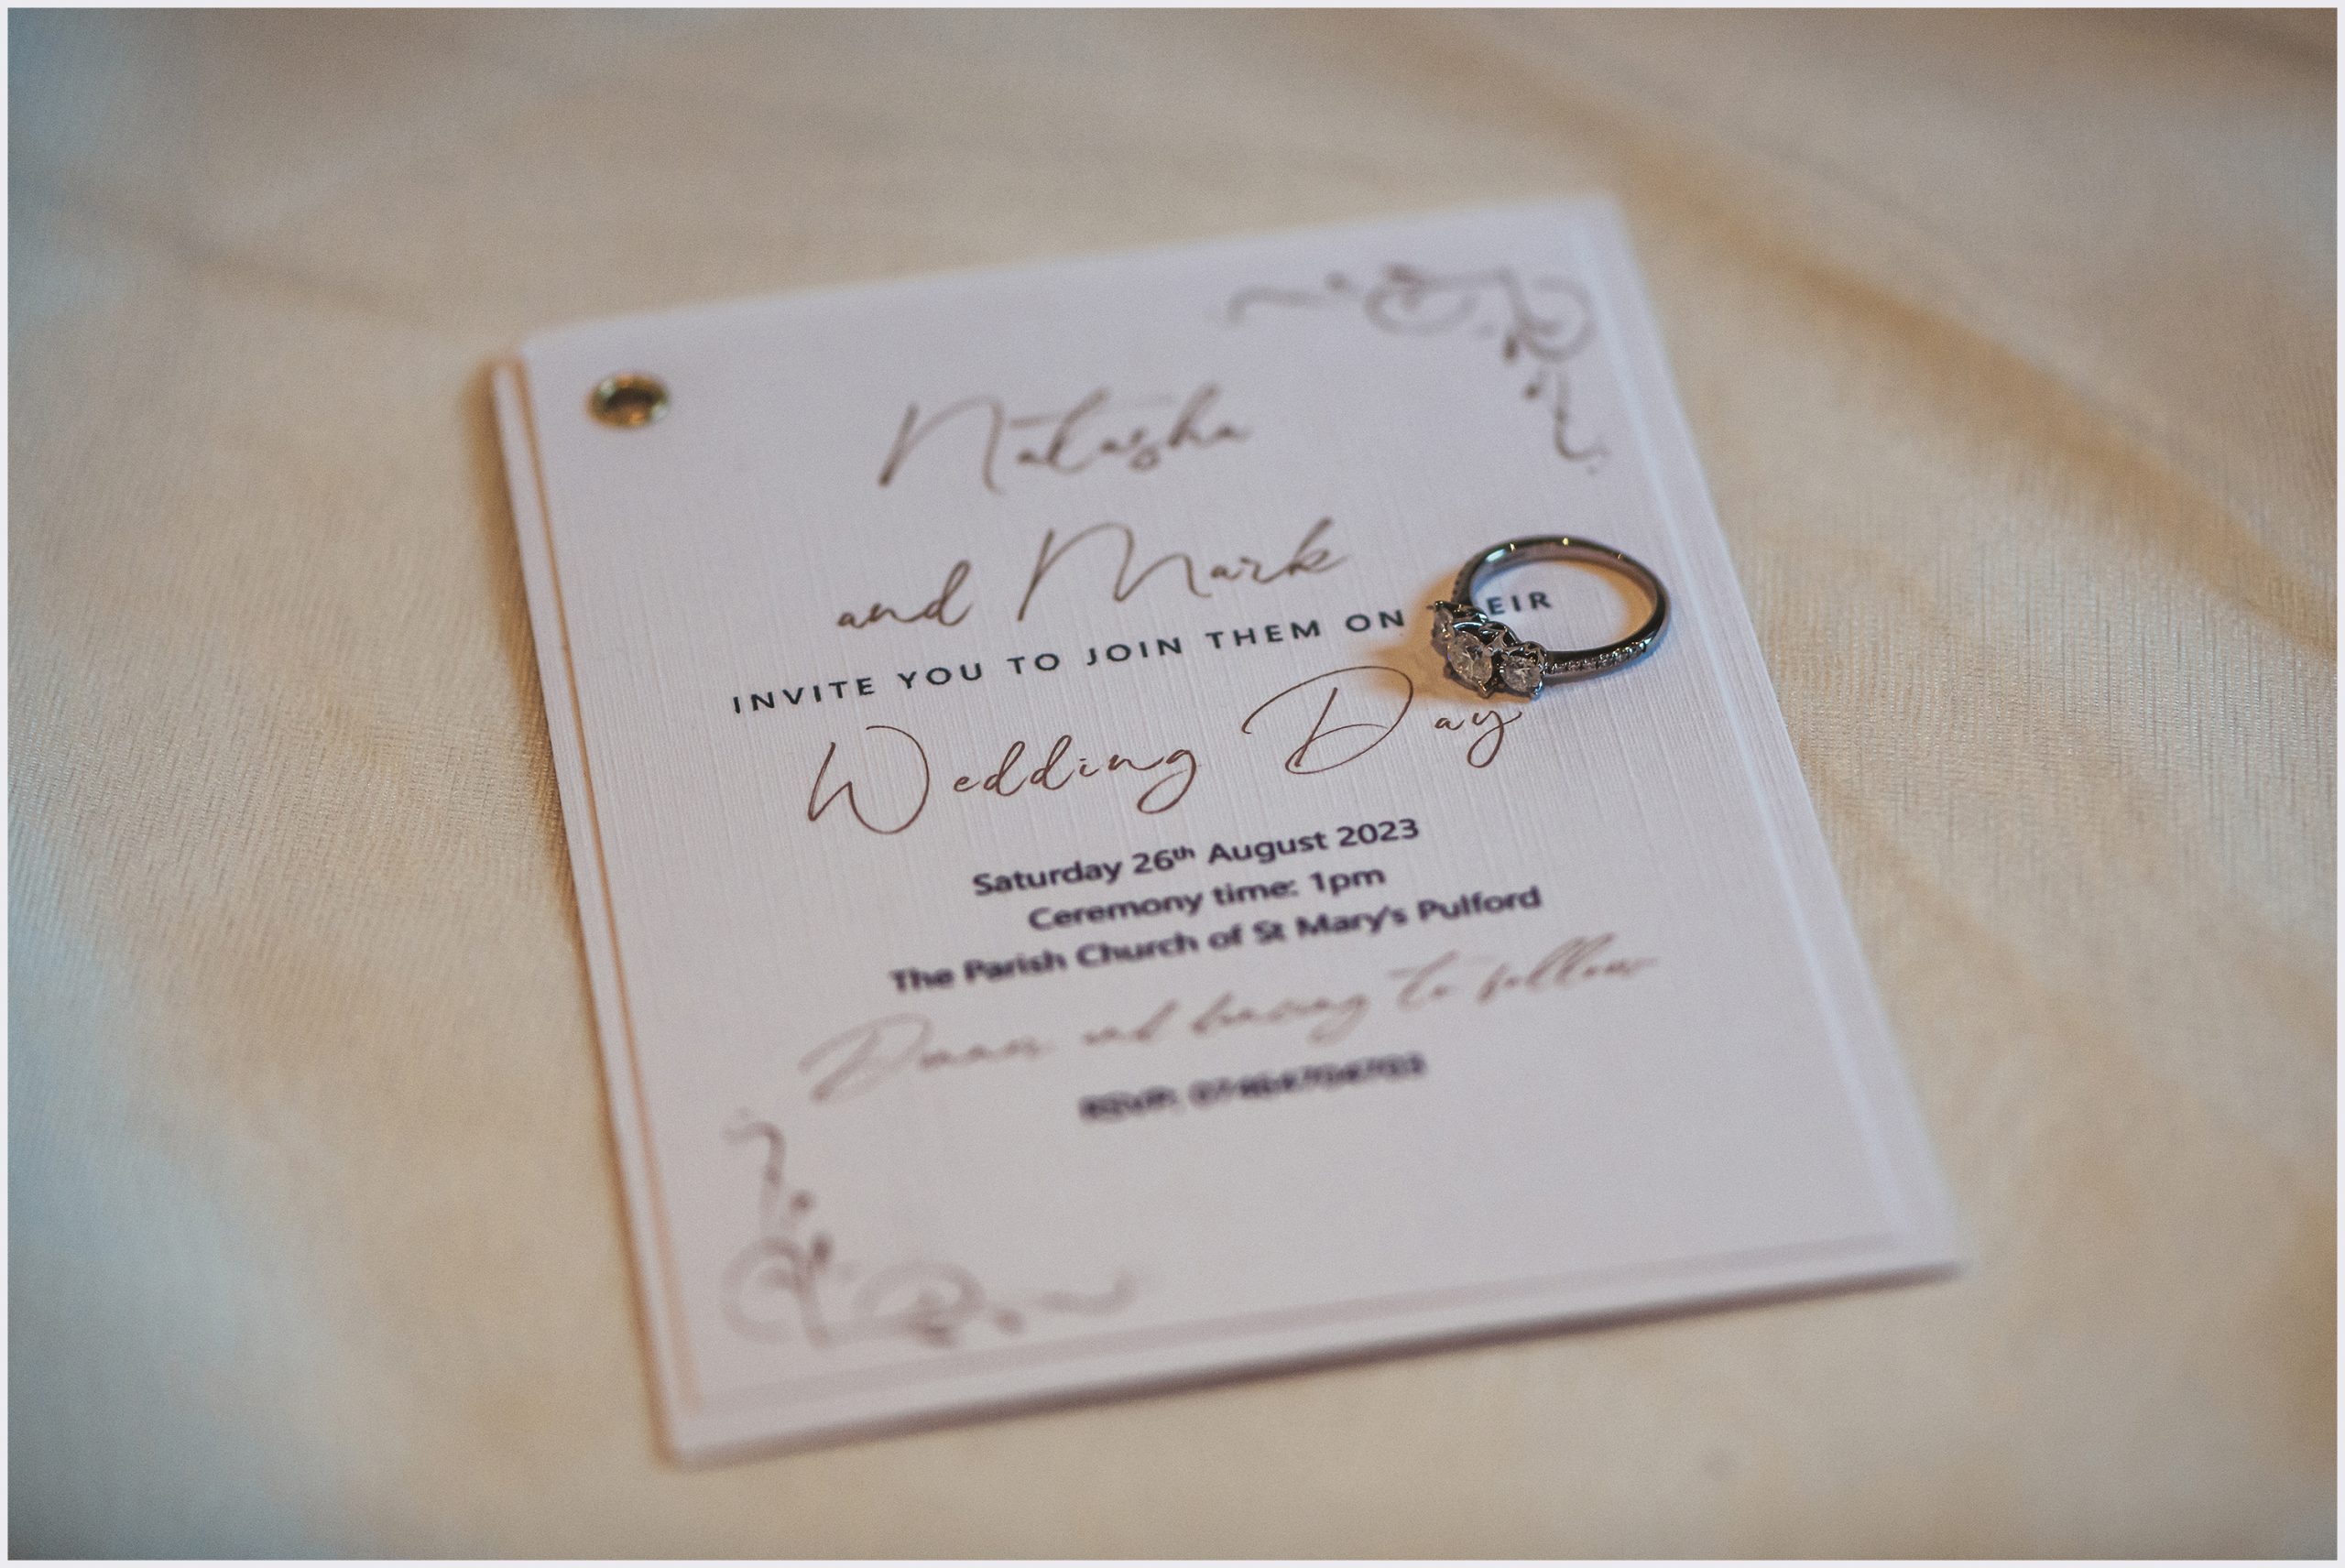 A beautiful engagement ring resting on a wedding invitation.